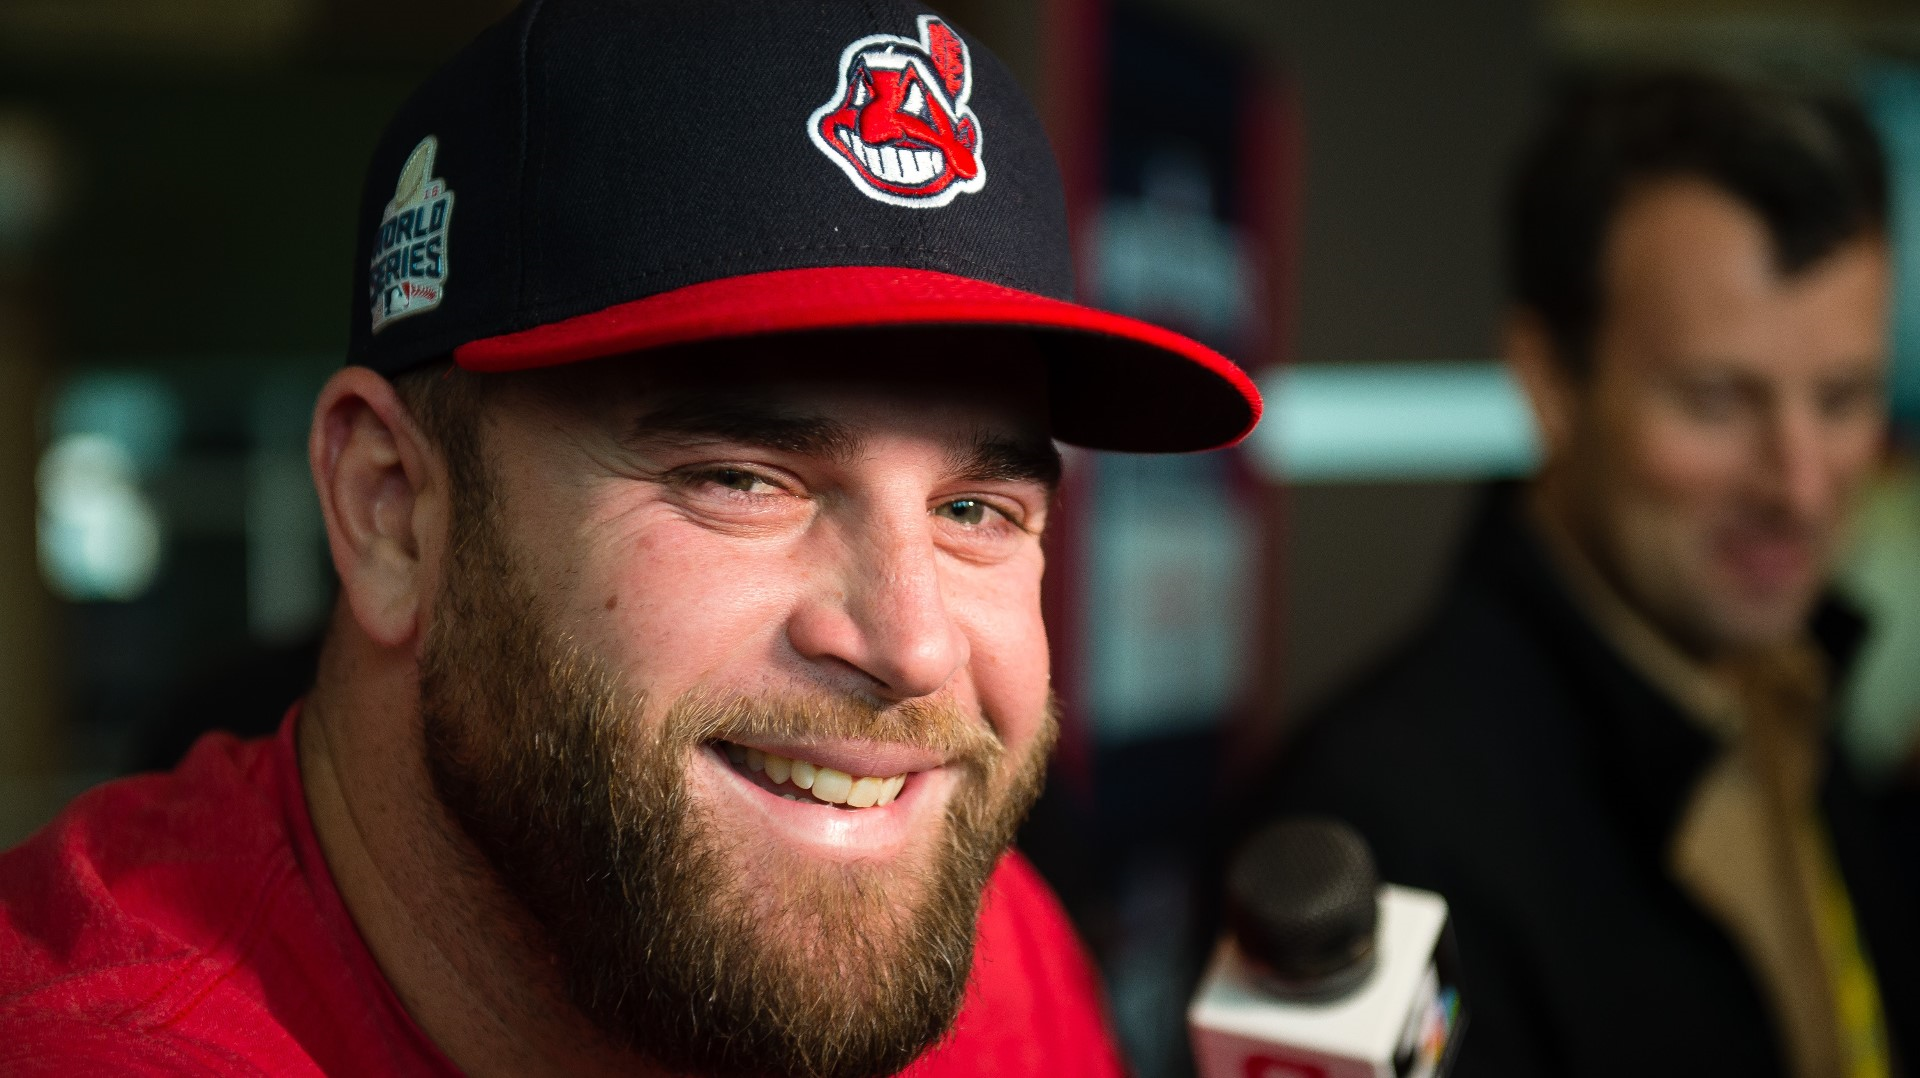 There always is' a Party at Napoli's: Mike Napoli discusses return to  Cleveland Indians